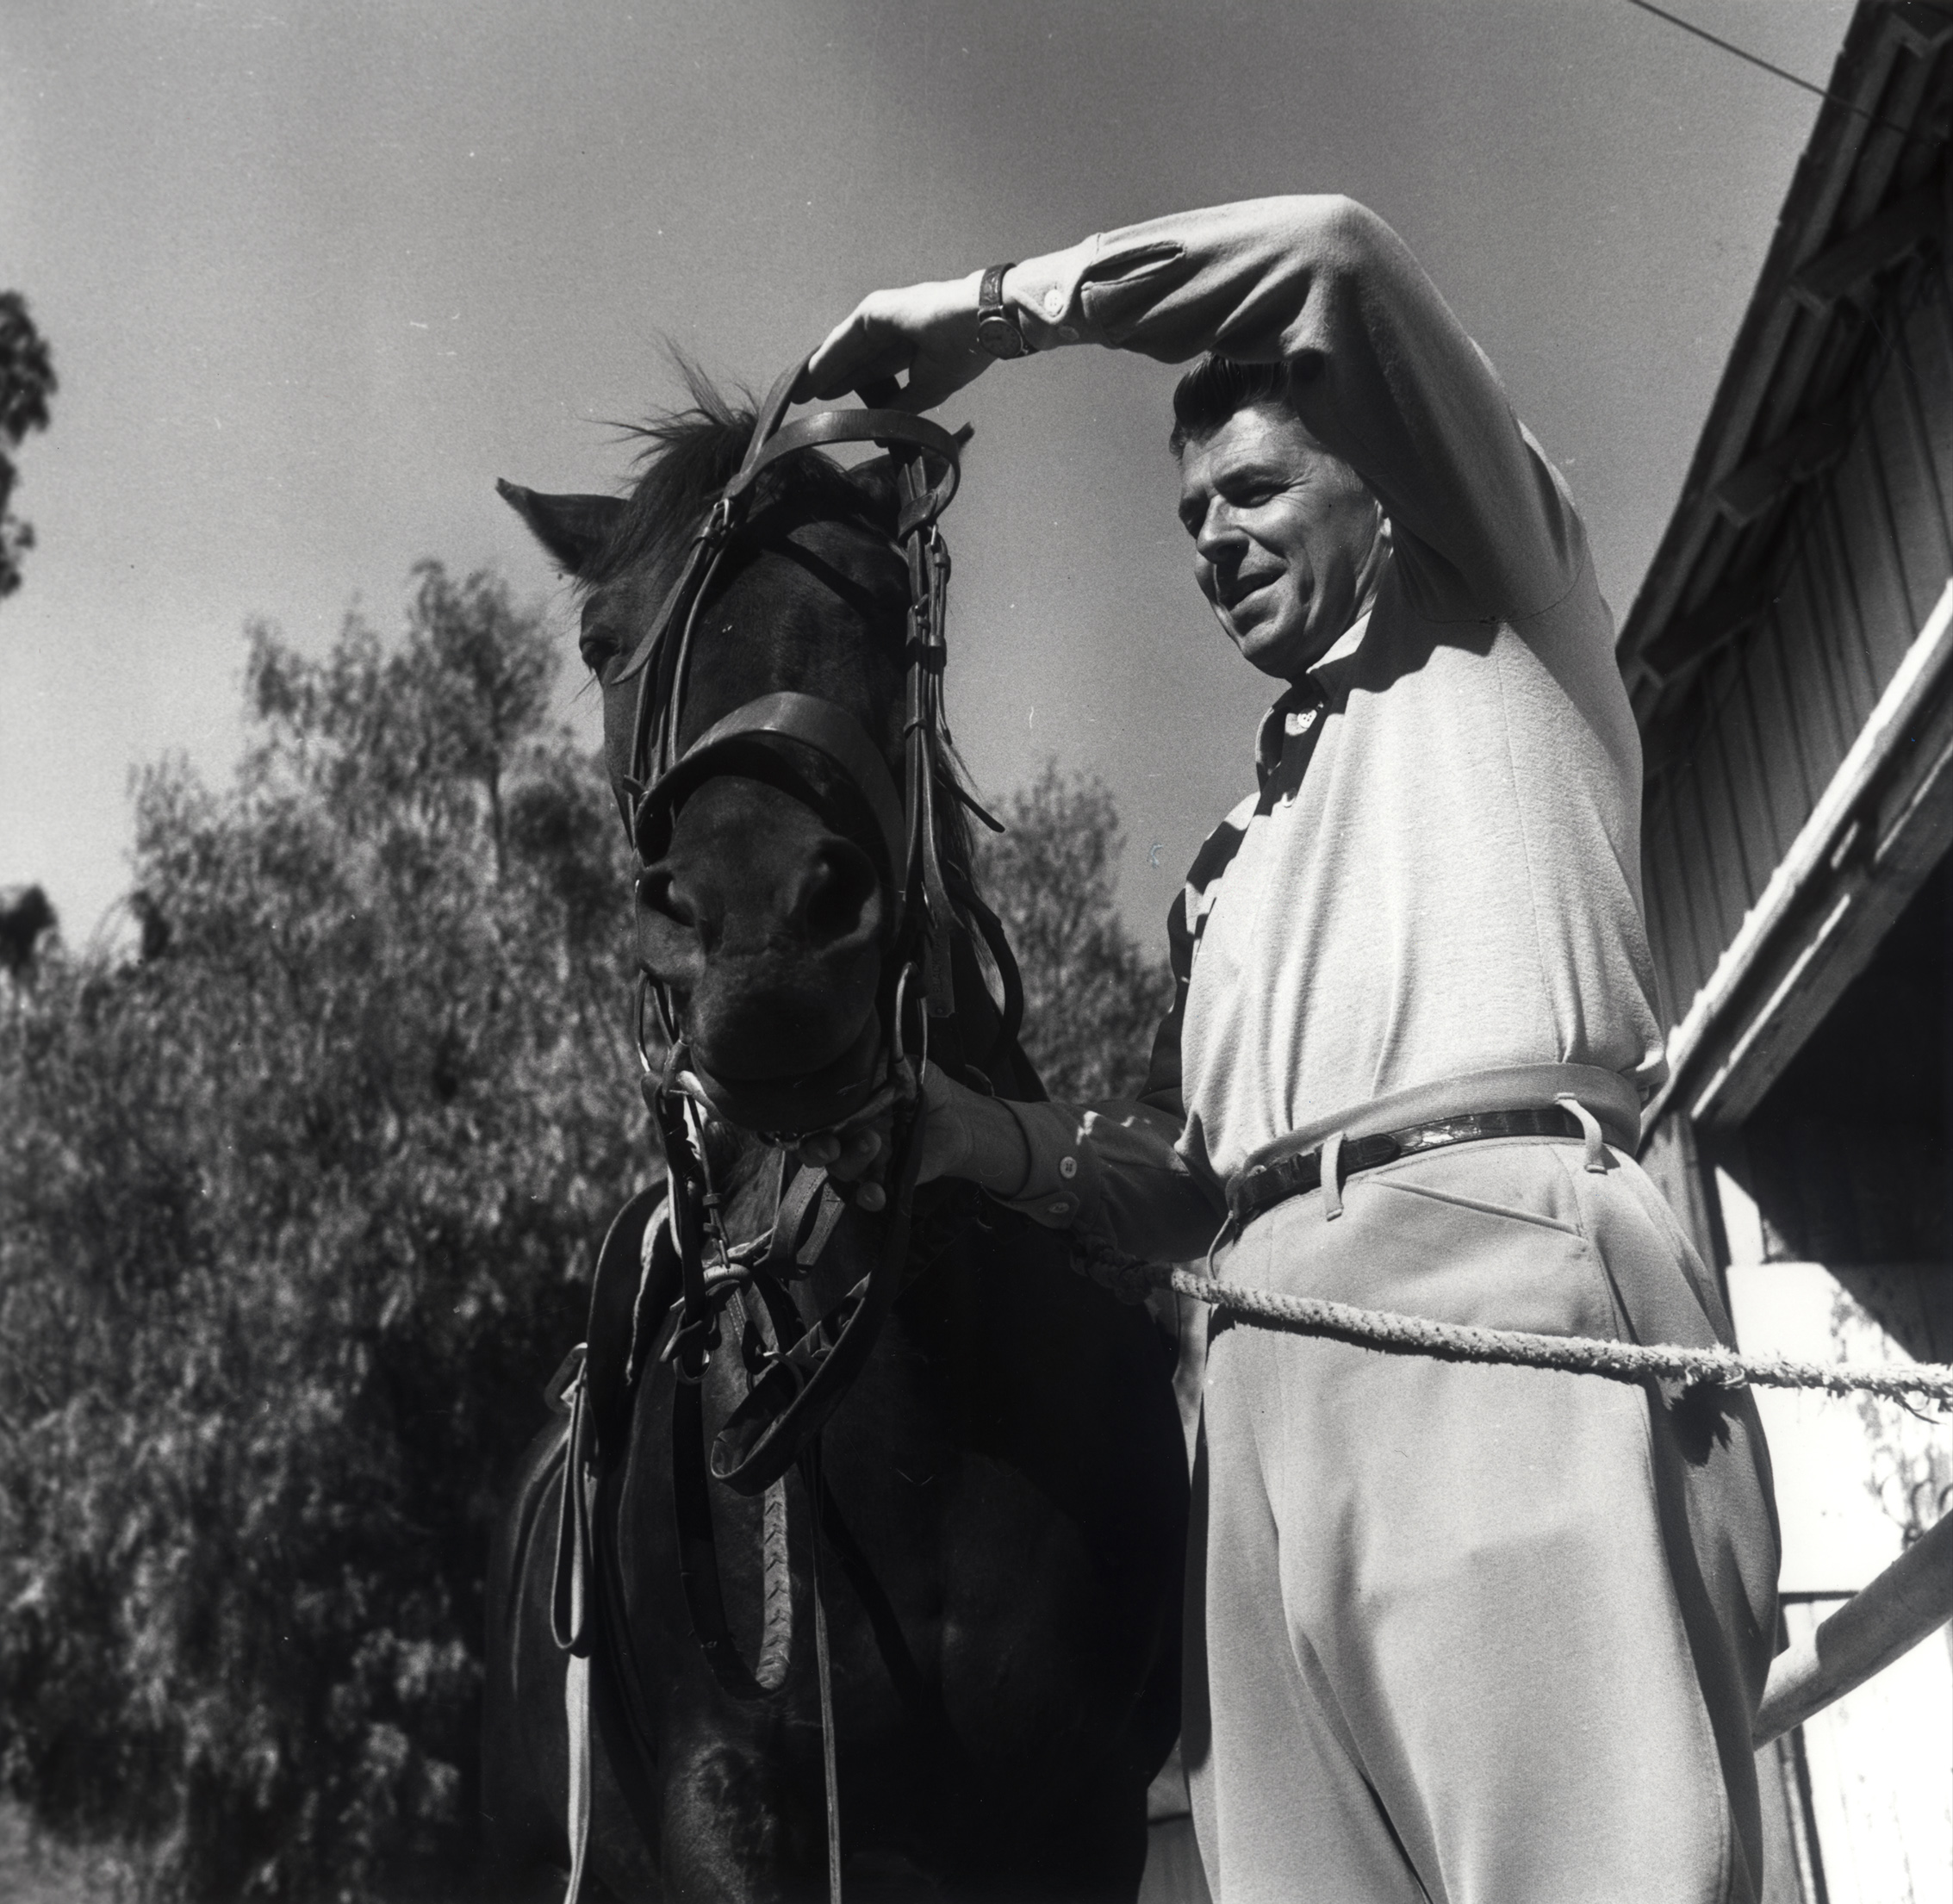 Ronald Reagan putting Bridle on his horse